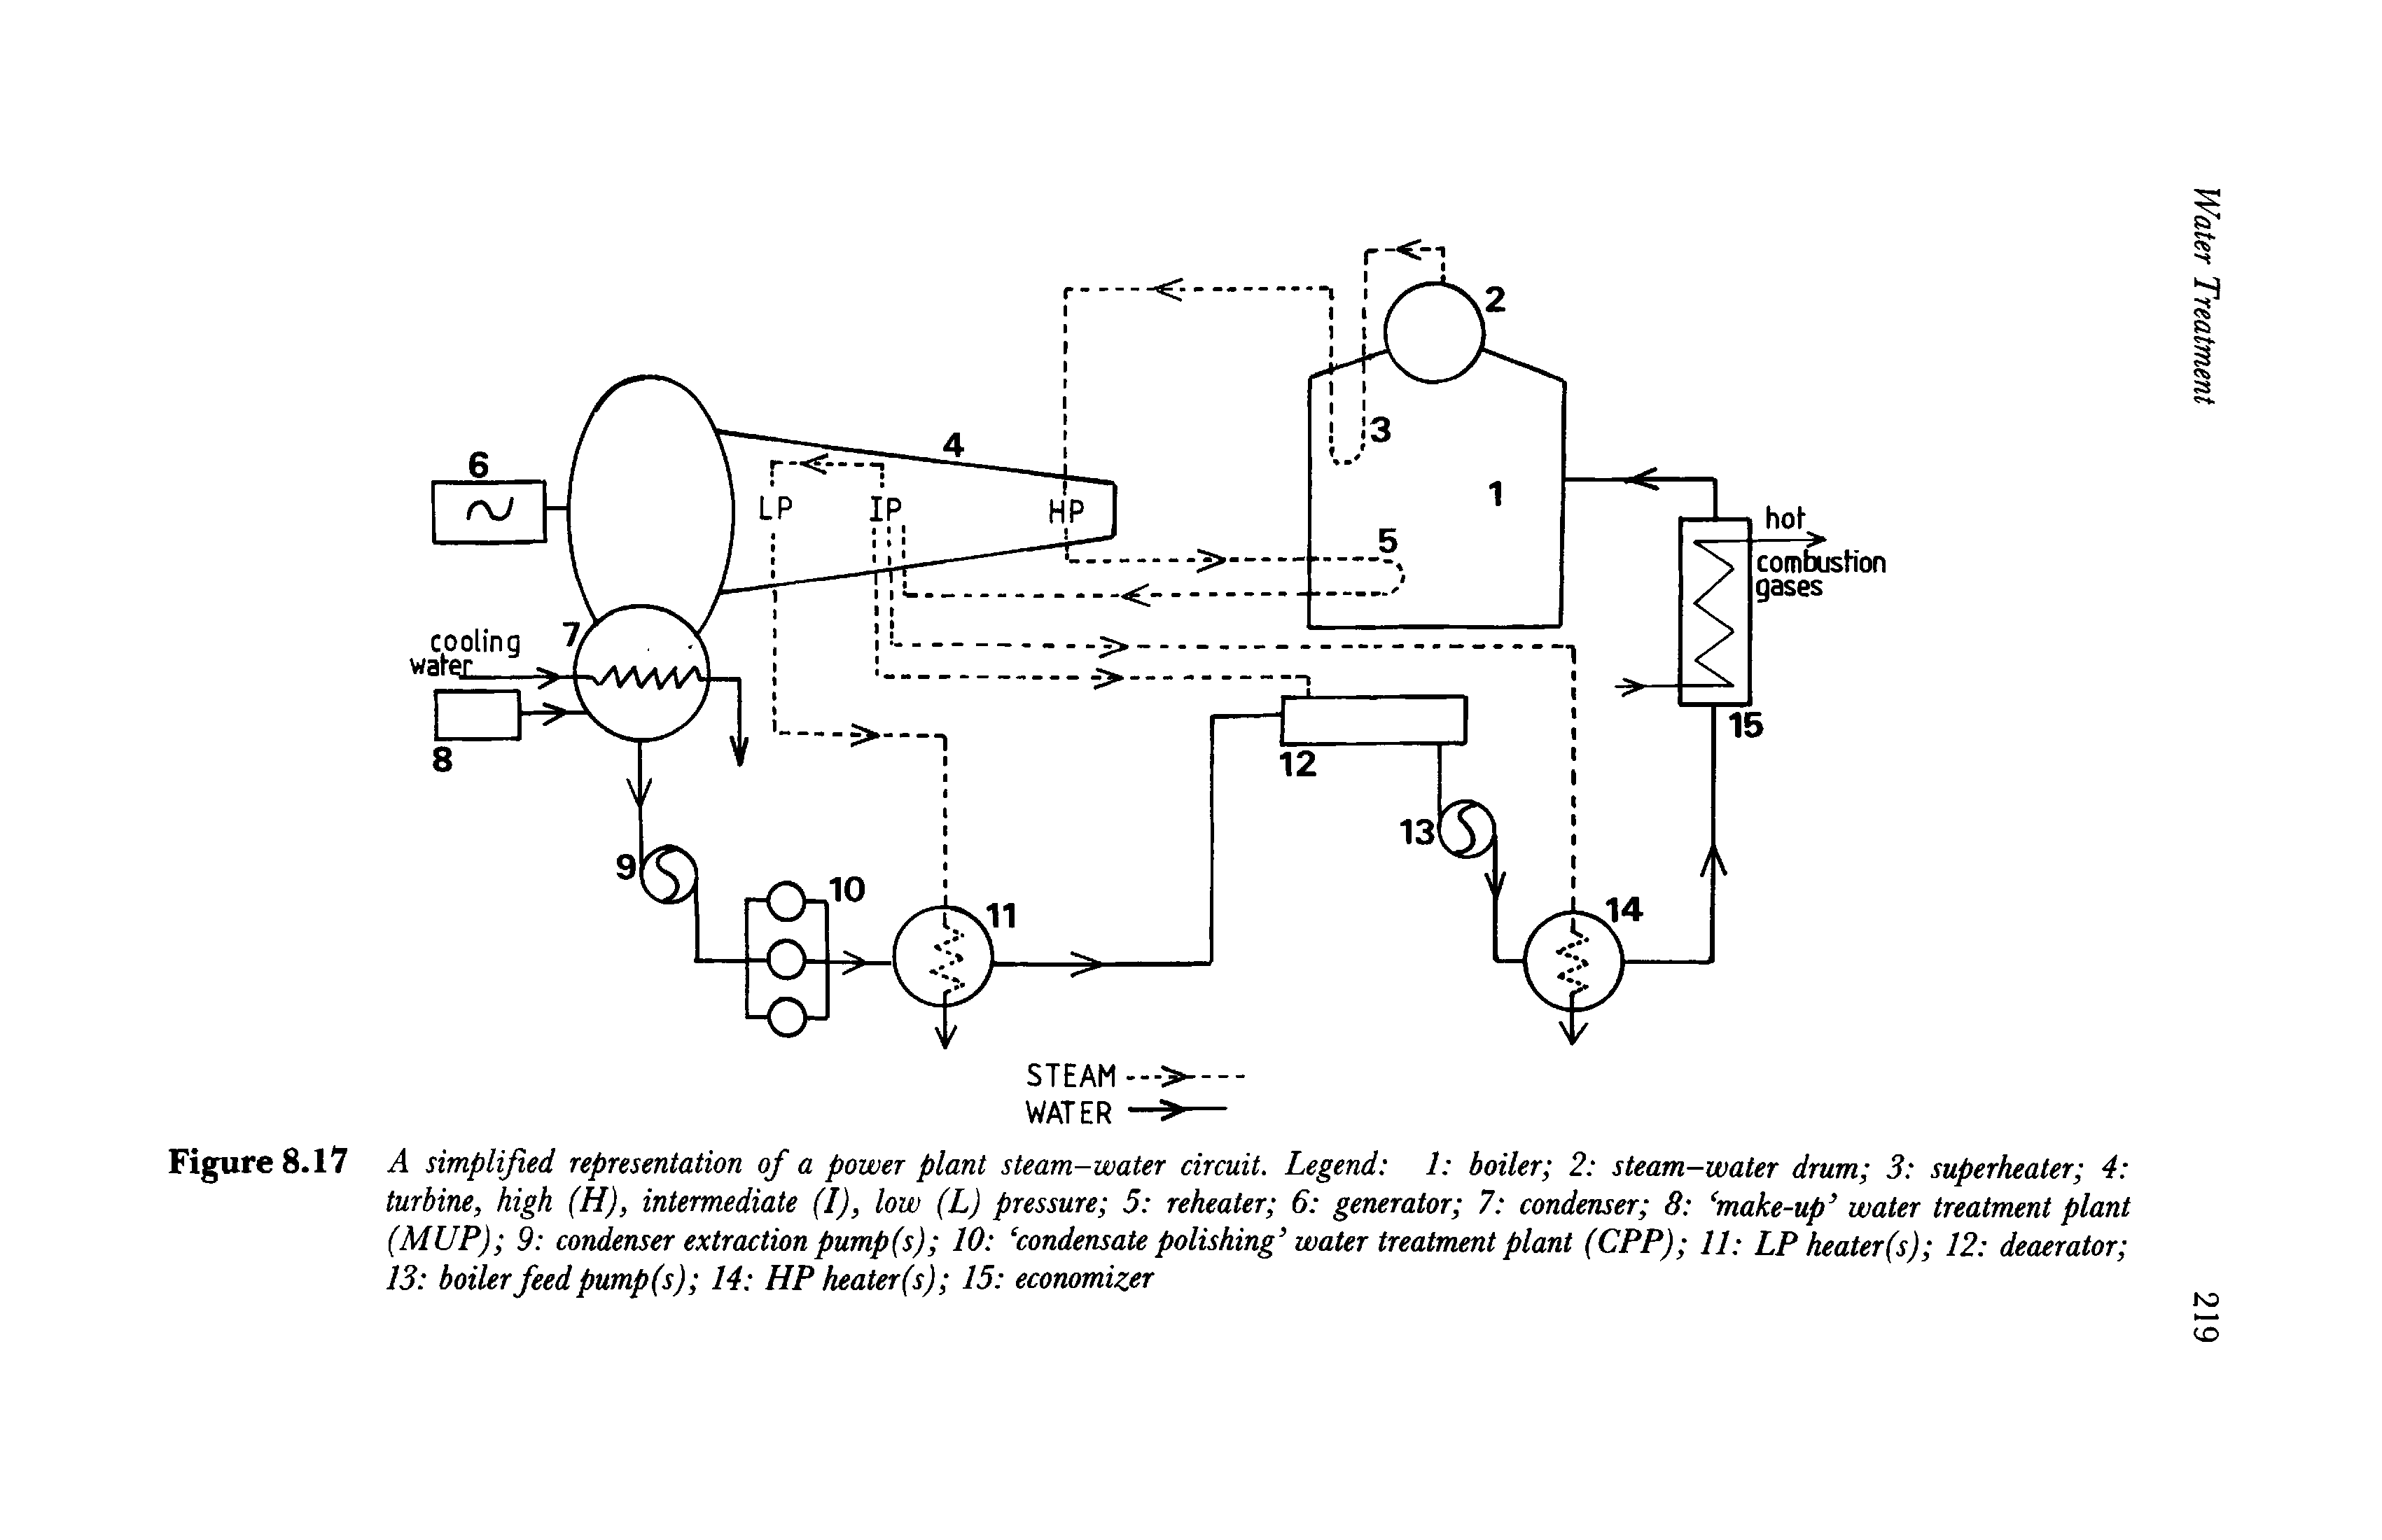 Figure 8.17 A simplified representation of a power plant steam-water circuit. Legend 1 boiler 2 steam-water drum 3 superheater 4 turbine, high (H), intermediate (I), low (L) pressure 5 reheater 6 generator 7 condenser 8 make-up water treatment plant (MUP) 9 condenser extraction pump(s) 10 condensate polishing water treatment plant (CPP) 11 LP heater(s) 12 deaerator 13 boiler feed pump (s) 14 HP heater(s) 15 economizer...